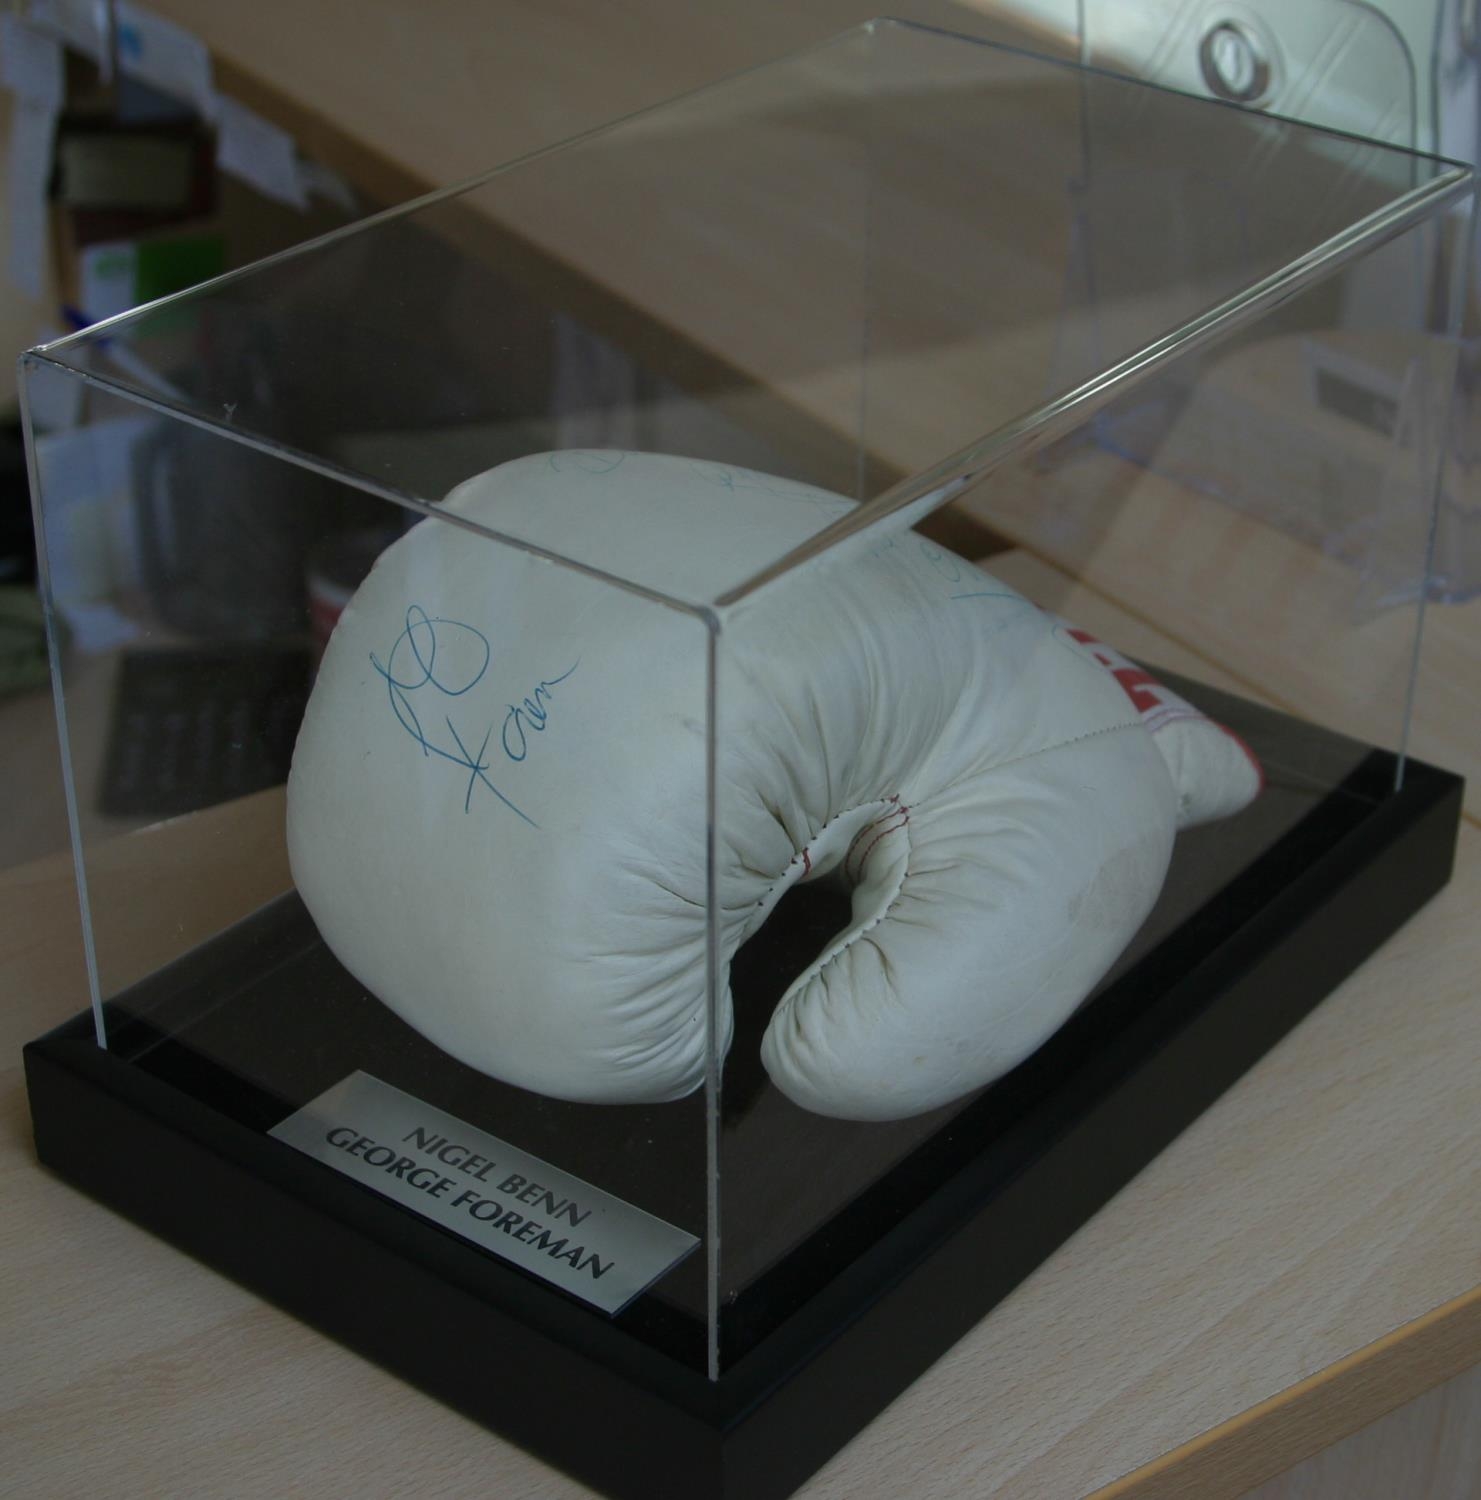 George Foreman & Nigel Benn Personally Signed Title Glove A full size Title boxing glove - Image 4 of 4